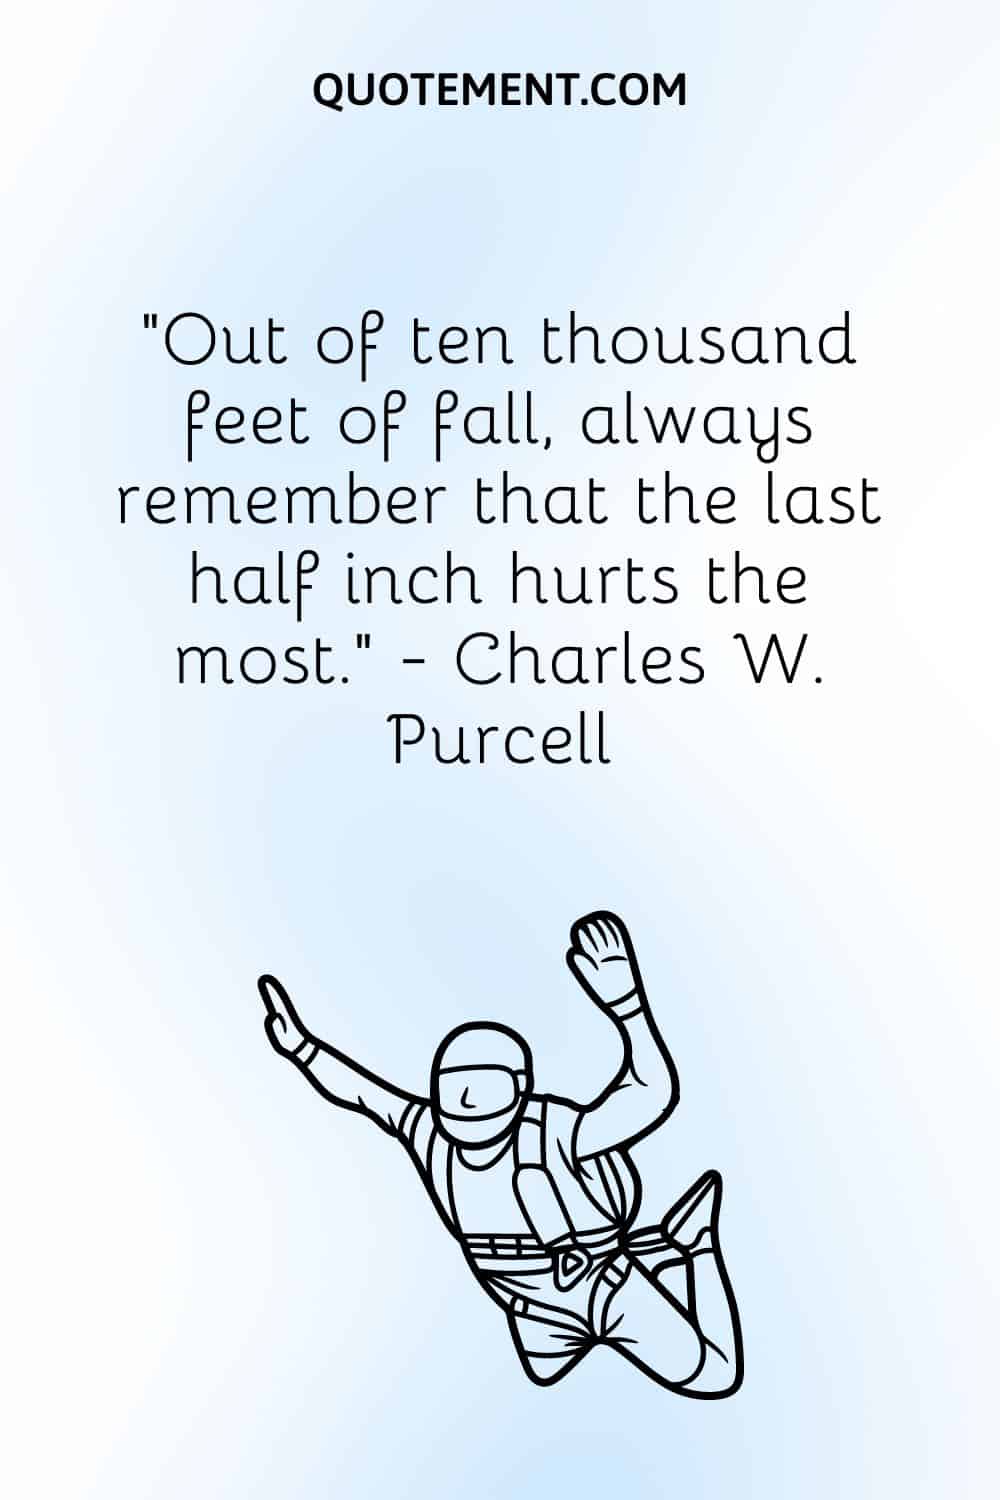 Out of ten thousand feet of fall, always remember that the last half inch hurts the most.